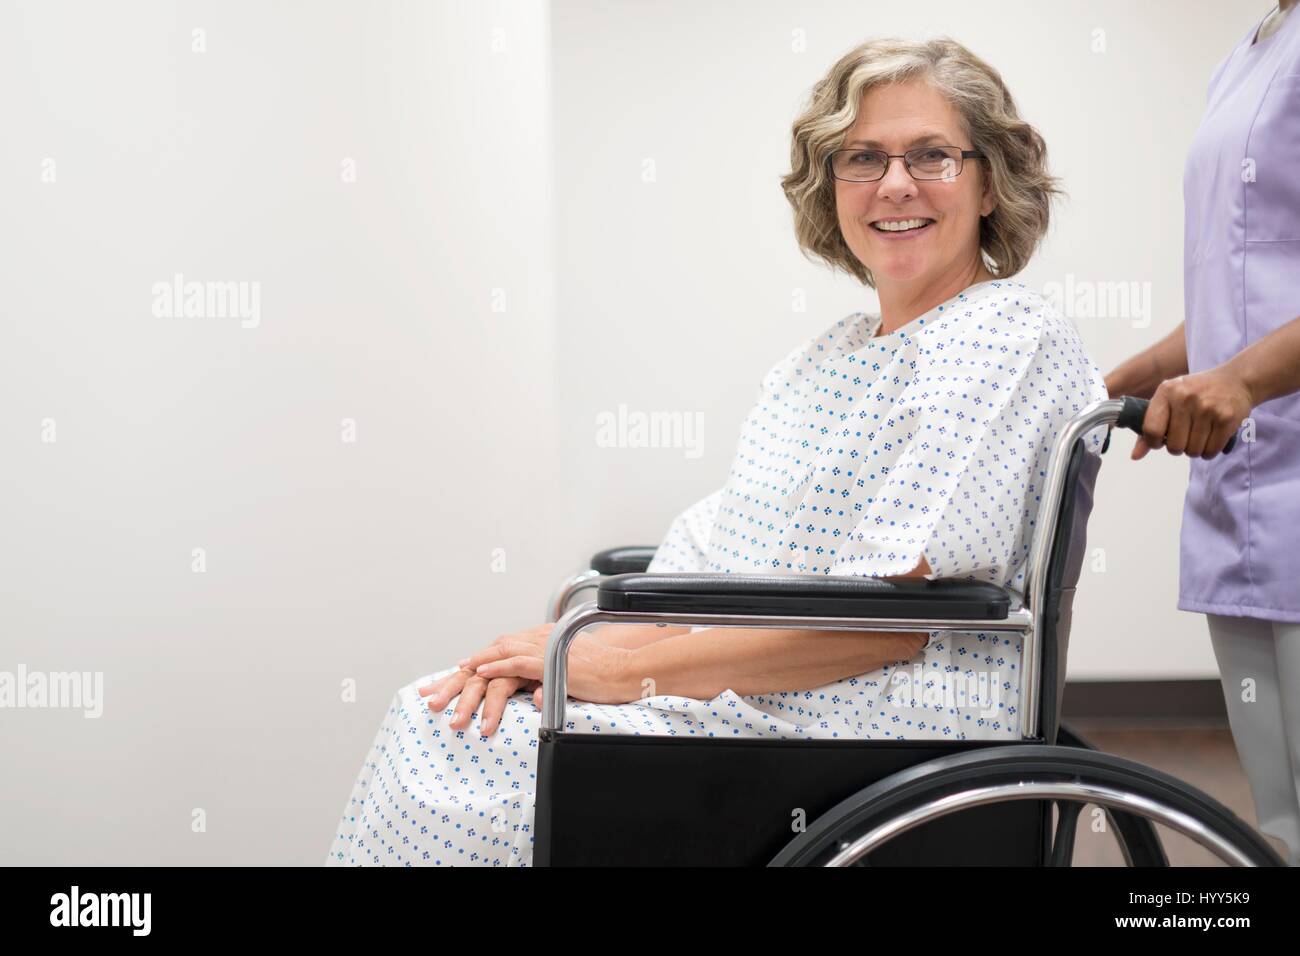 Nurse pushing female patient in wheelchair. Stock Photo